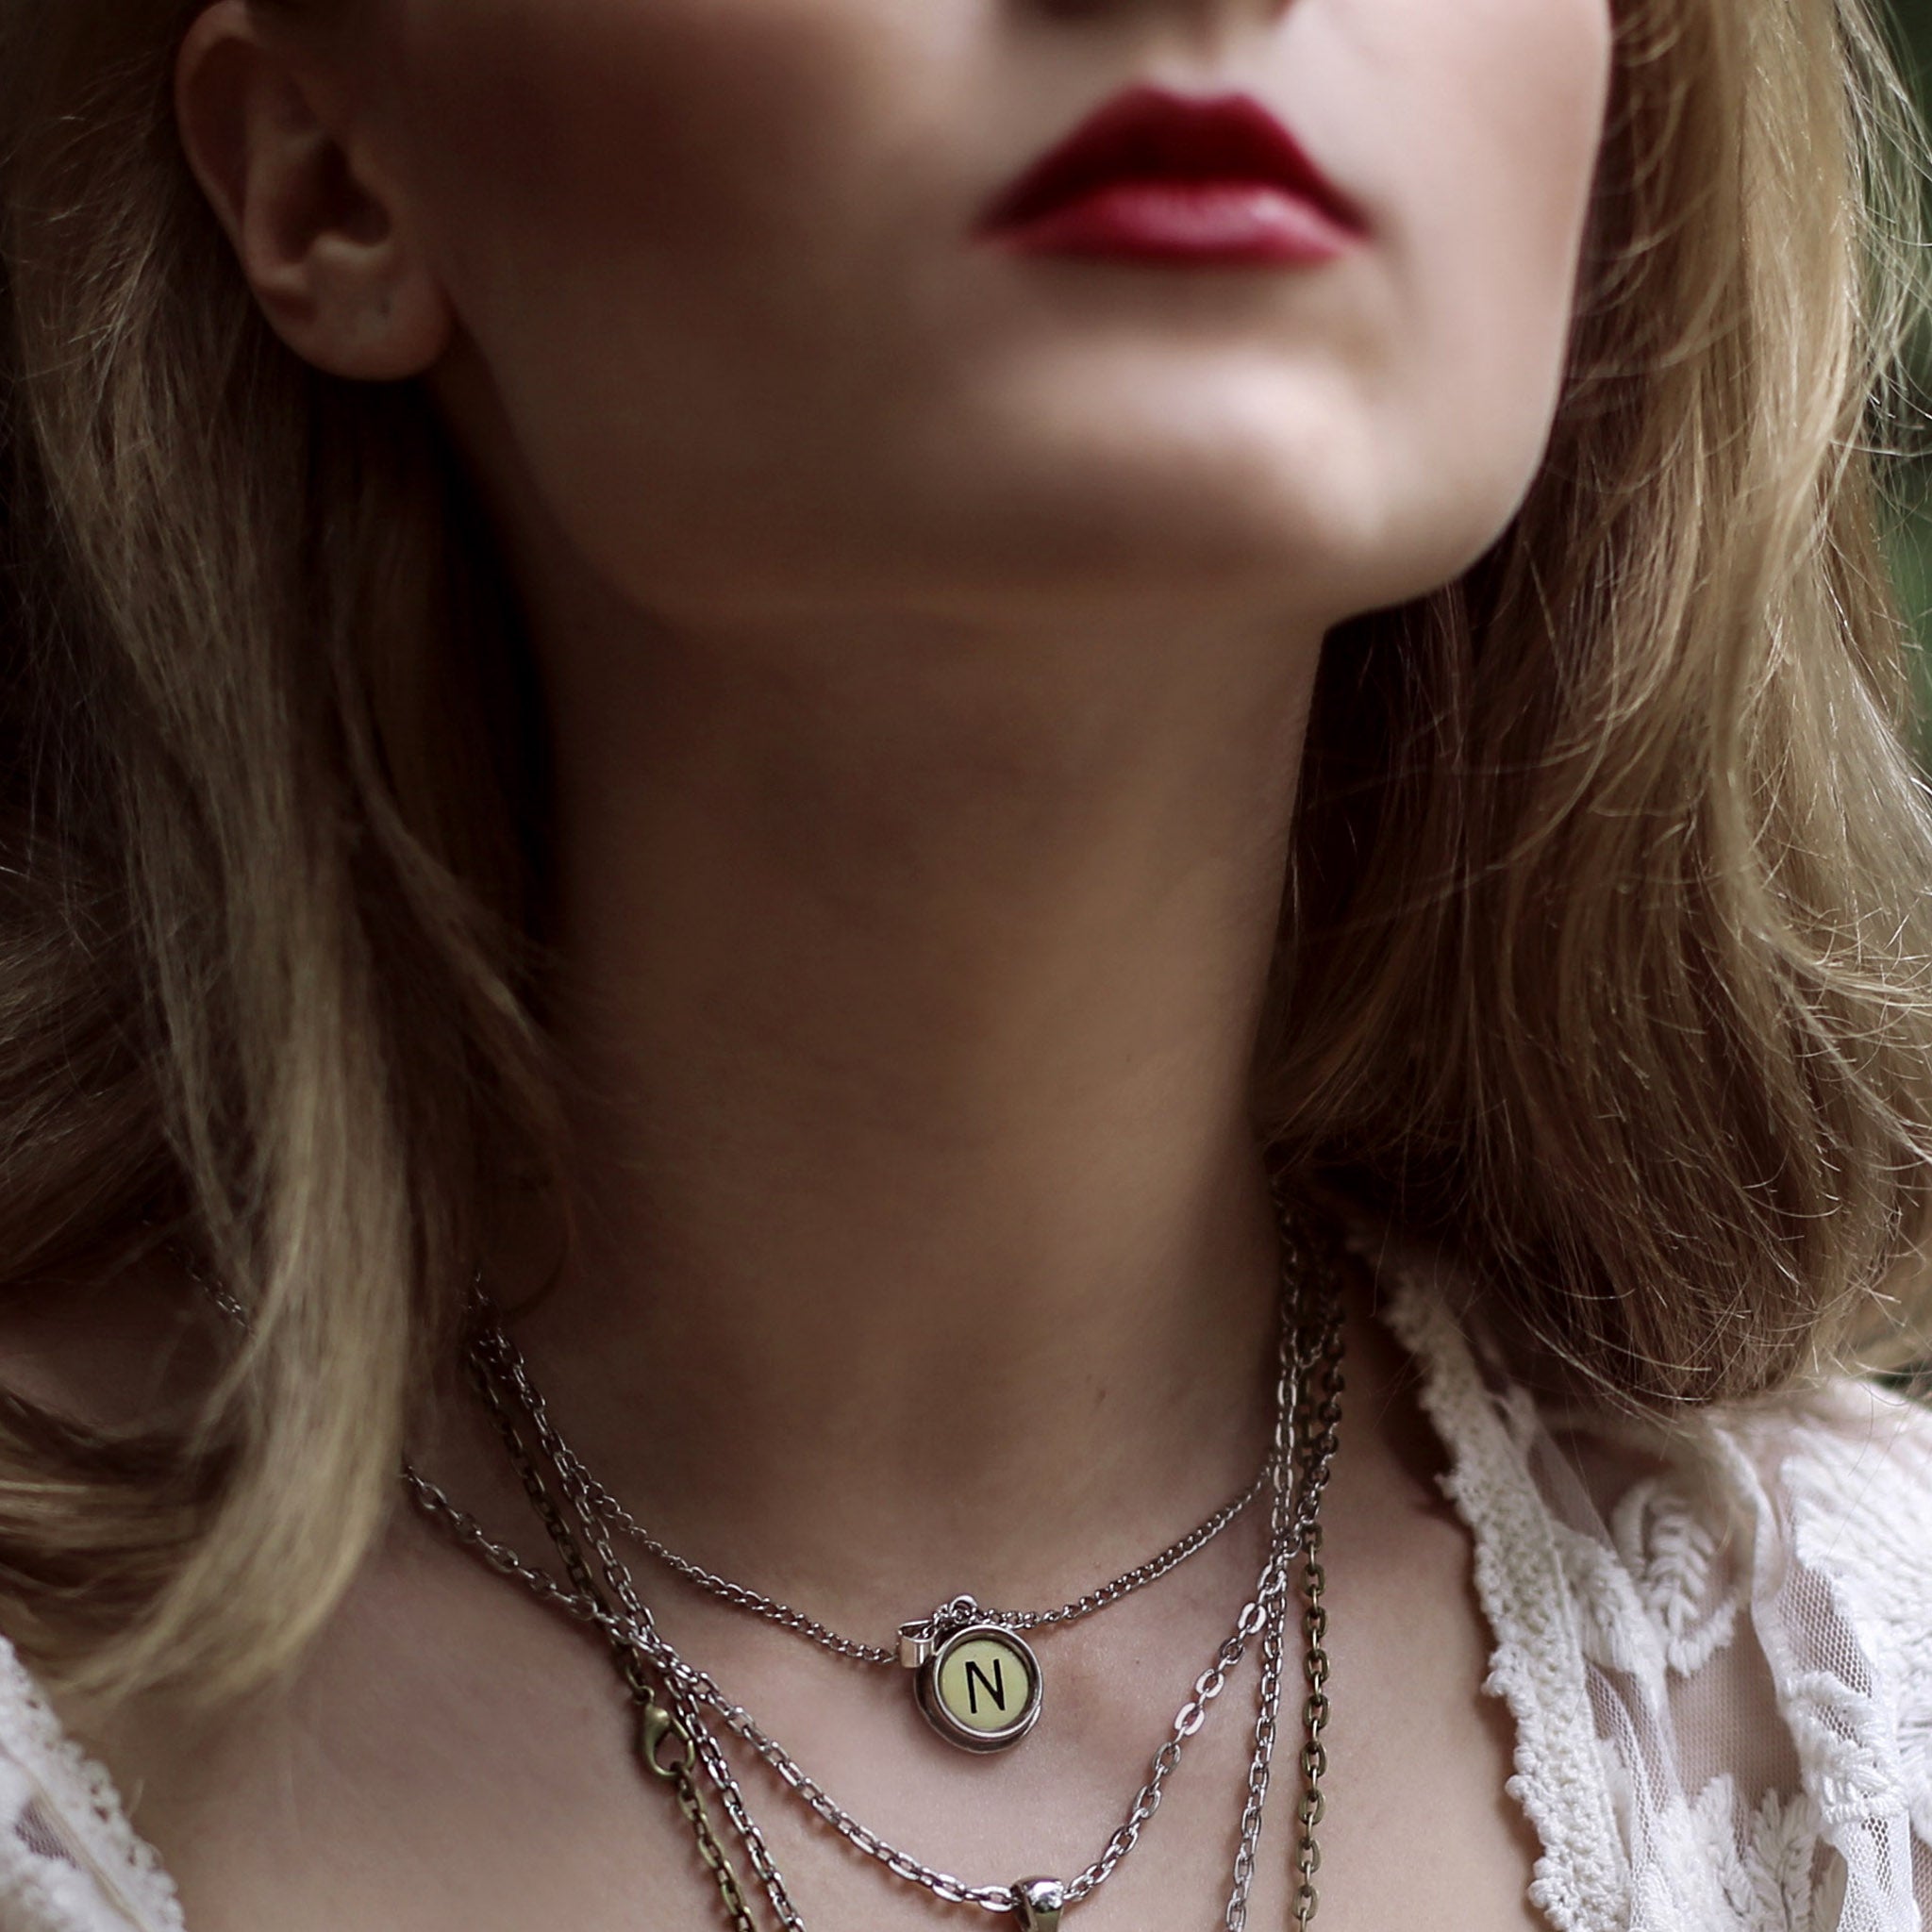 Model wearing initial necklace made of authentic vintage ivory typewriter key